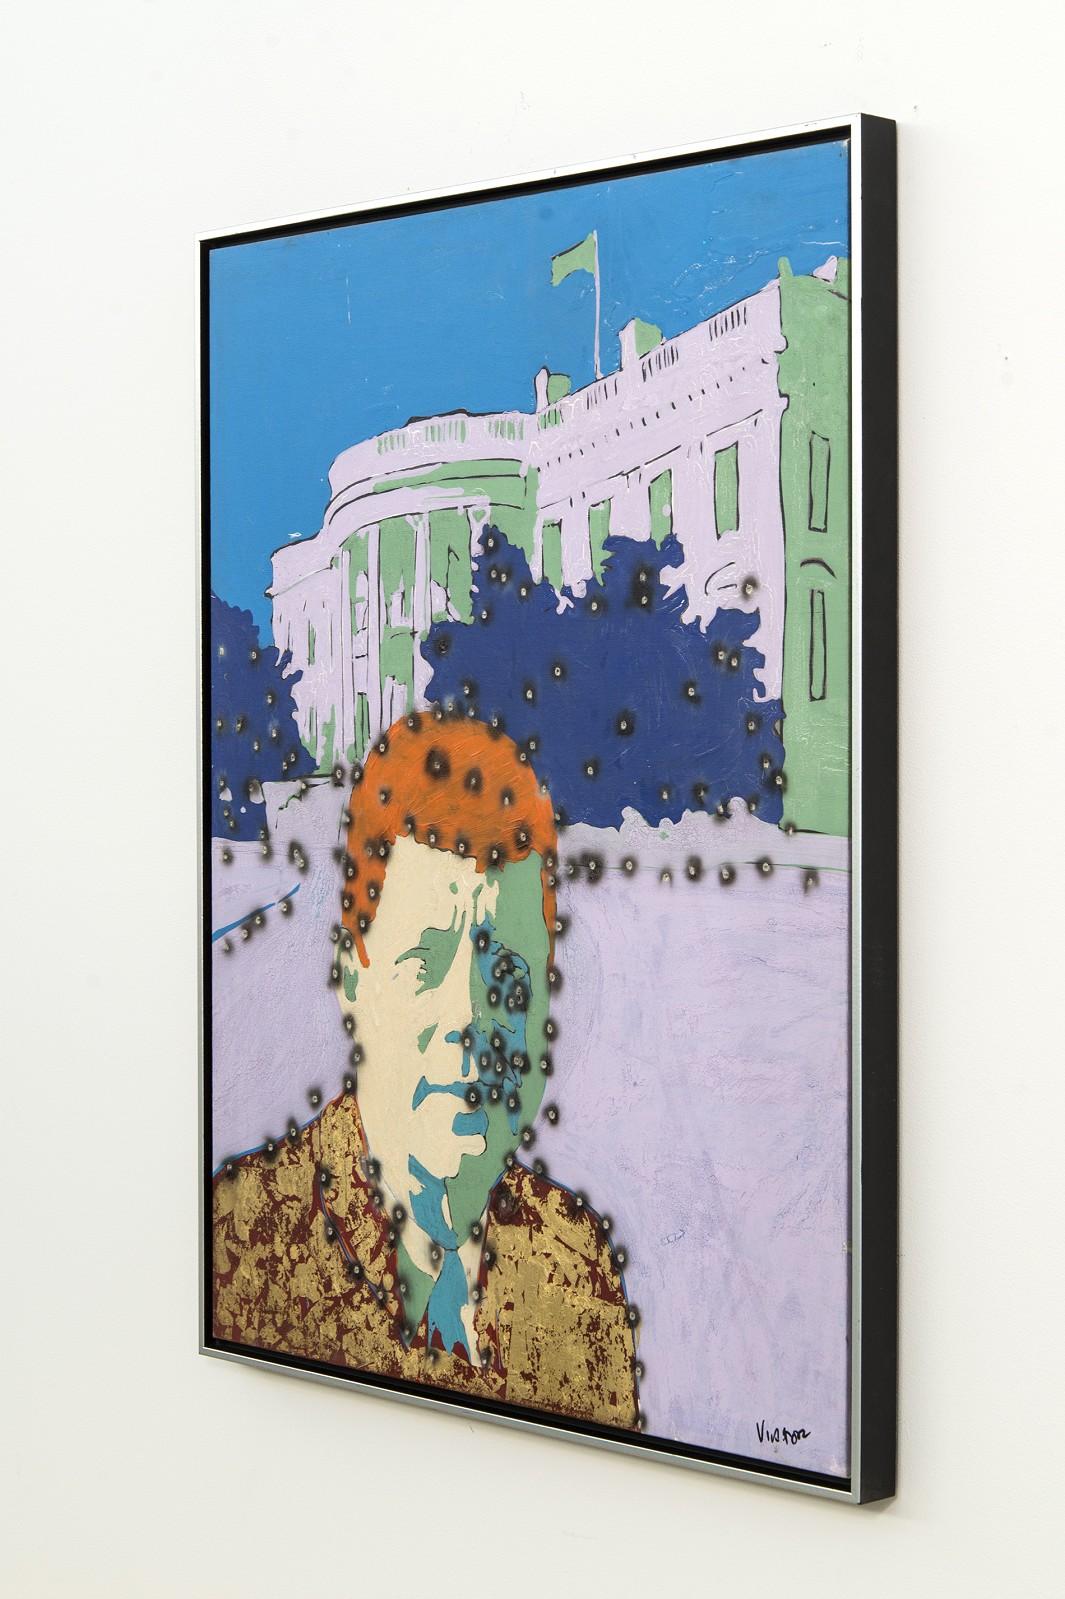 Whitehouse Kennedy - graphic pop-art, cultural America, gilded acrylic on canvas - Gold Abstract Painting by Viktor Mitic